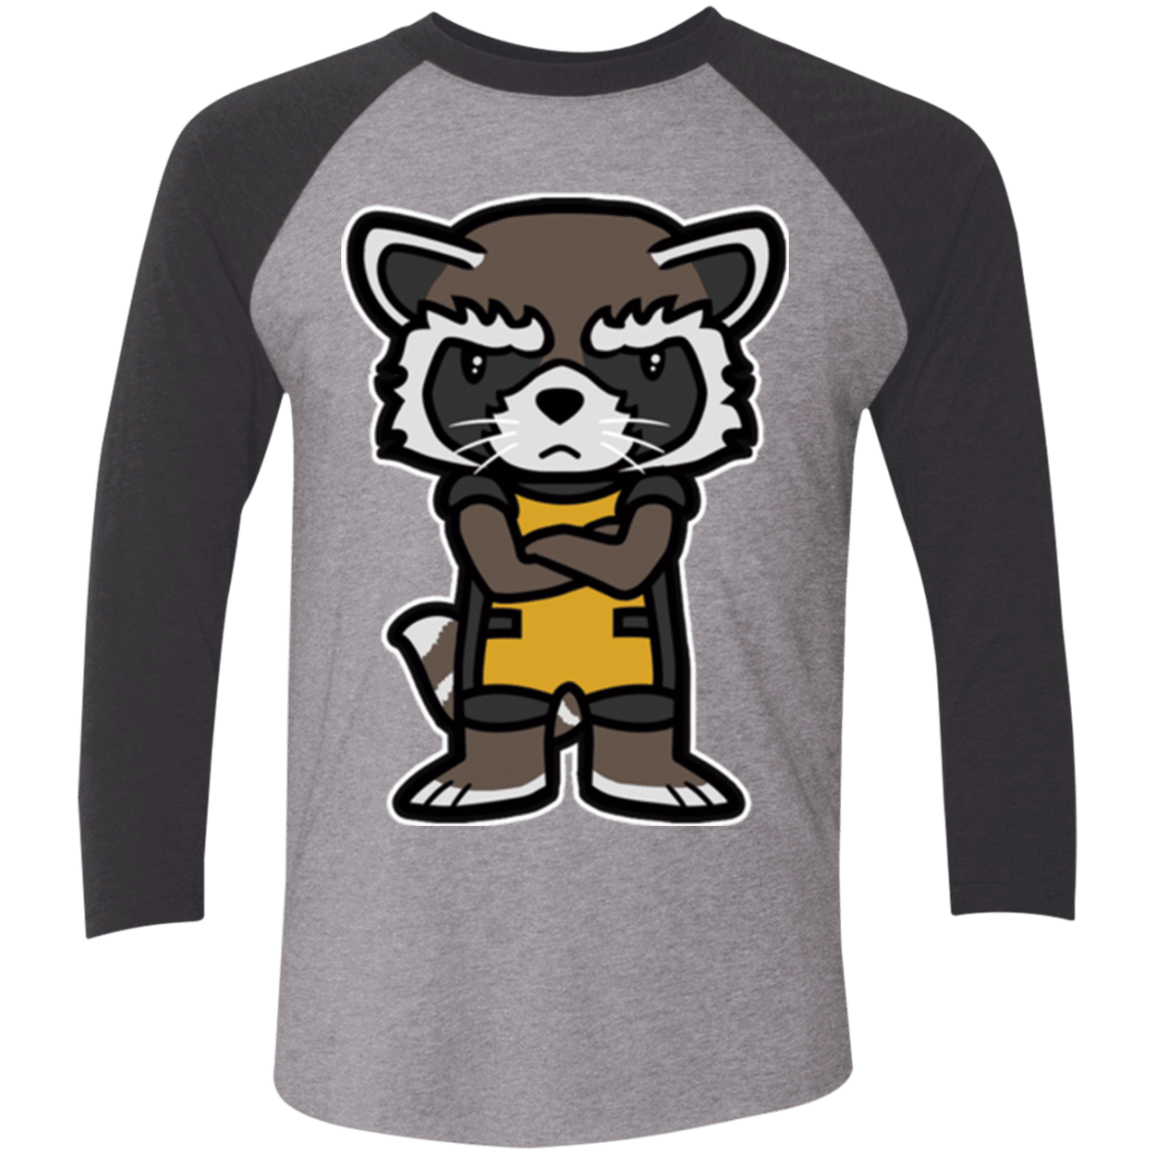 T-Shirts Premium Heather/ Vintage Black / X-Small Angry Racoon Triblend 3/4 Sleeve